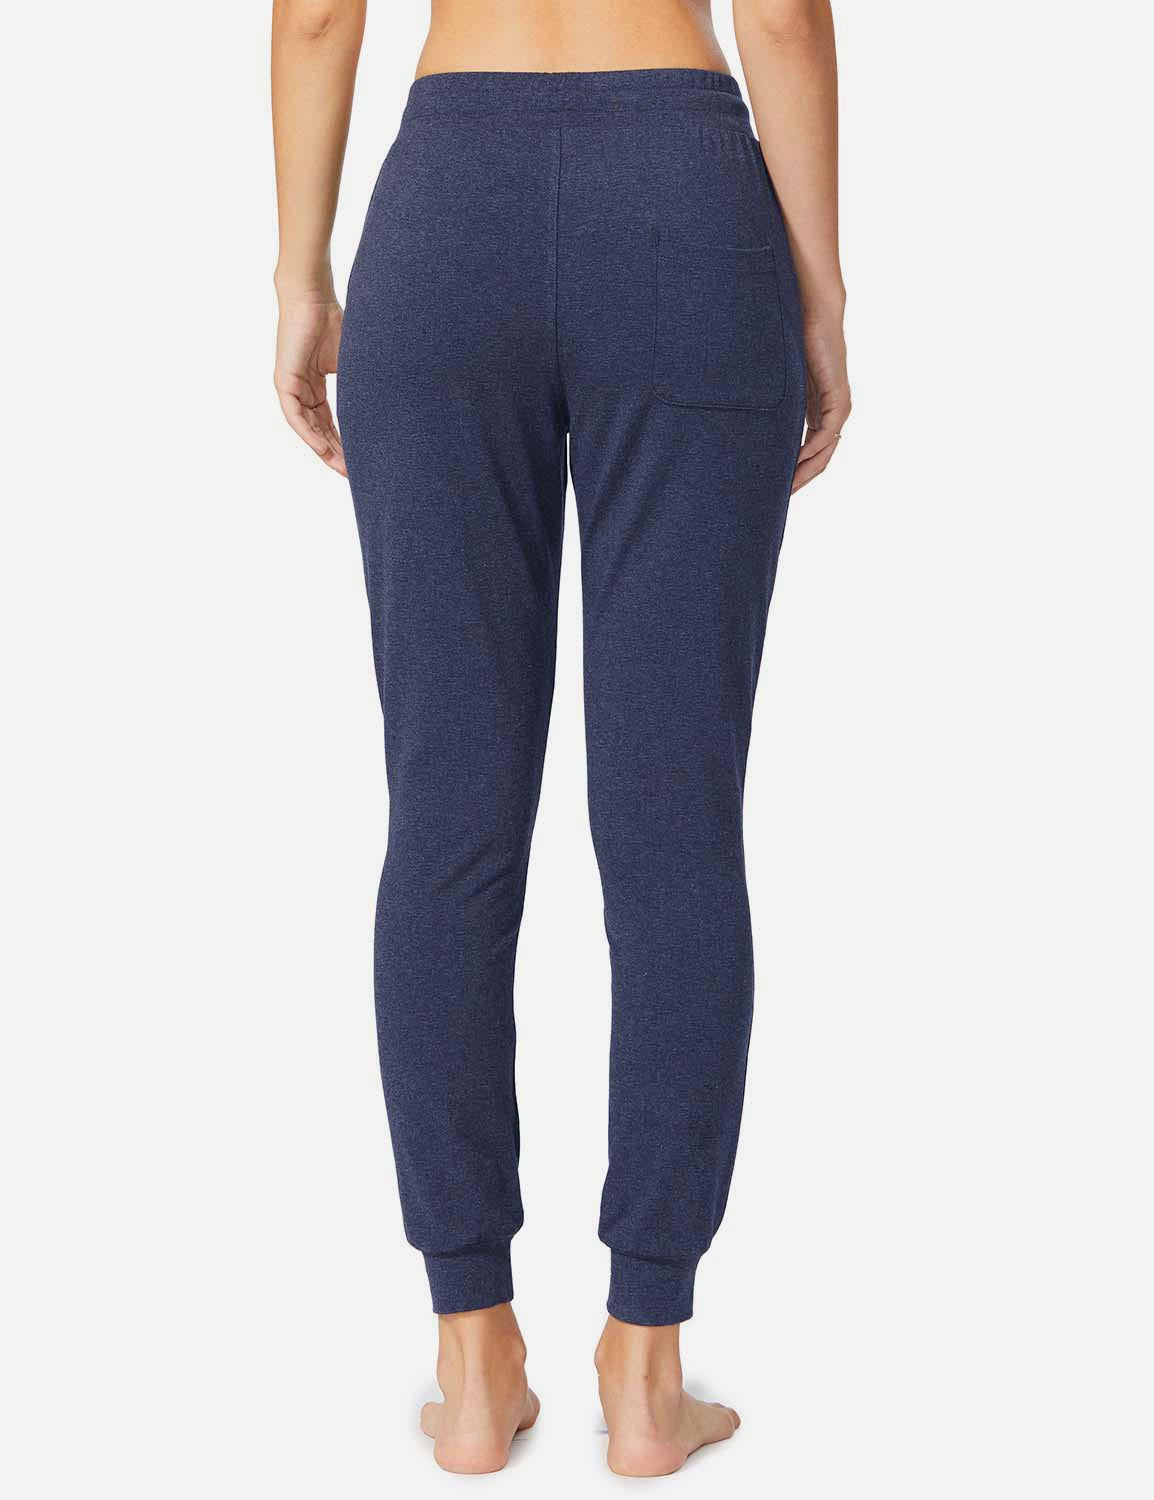 Baleaf Women's Cotton Comfy Pocketed & Tapered Weekend Joggers abh103 Navy Heather Back